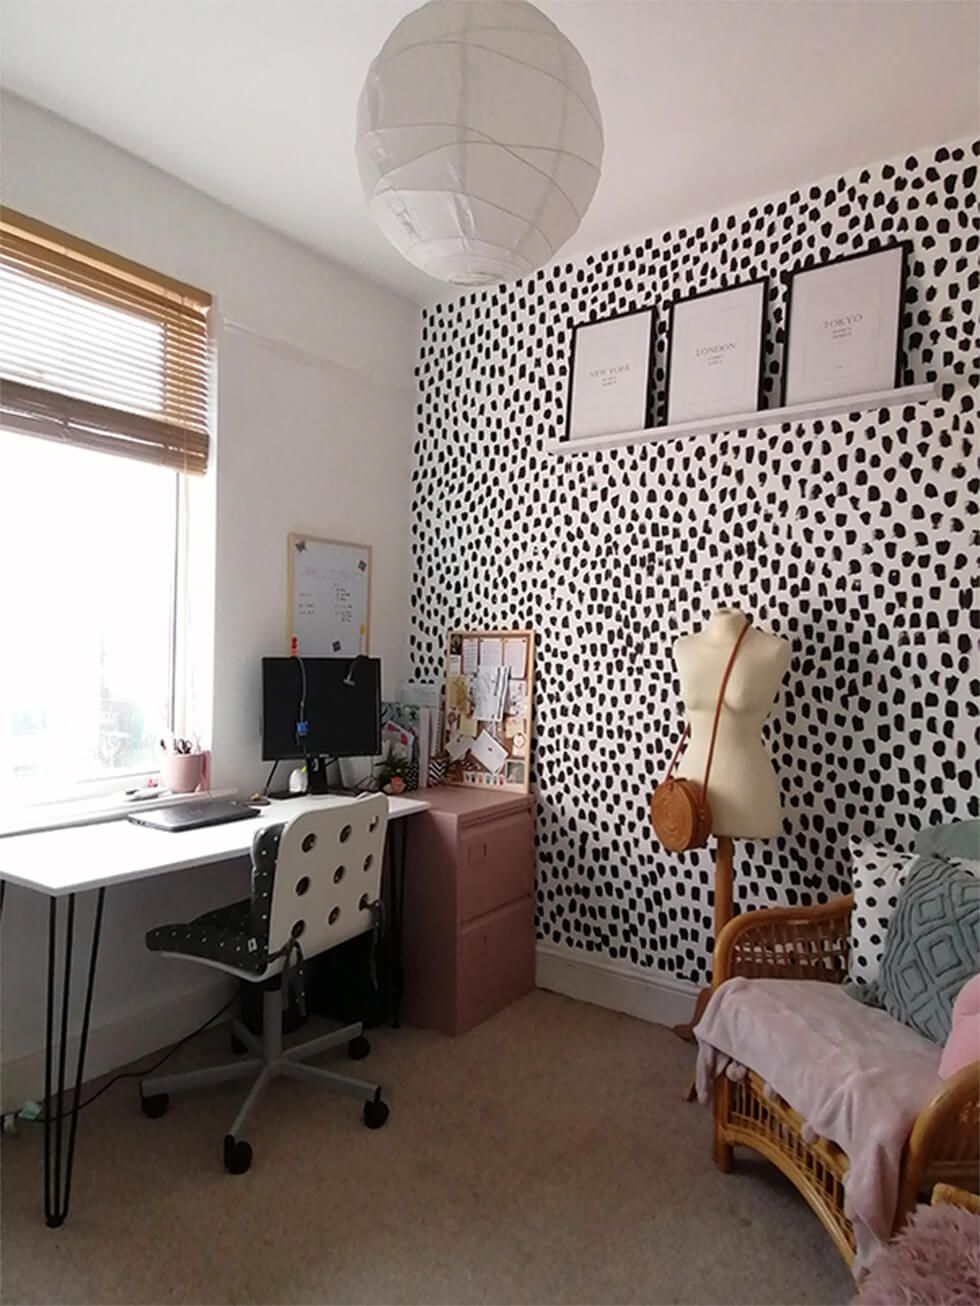 Home office with polka dot feature wall